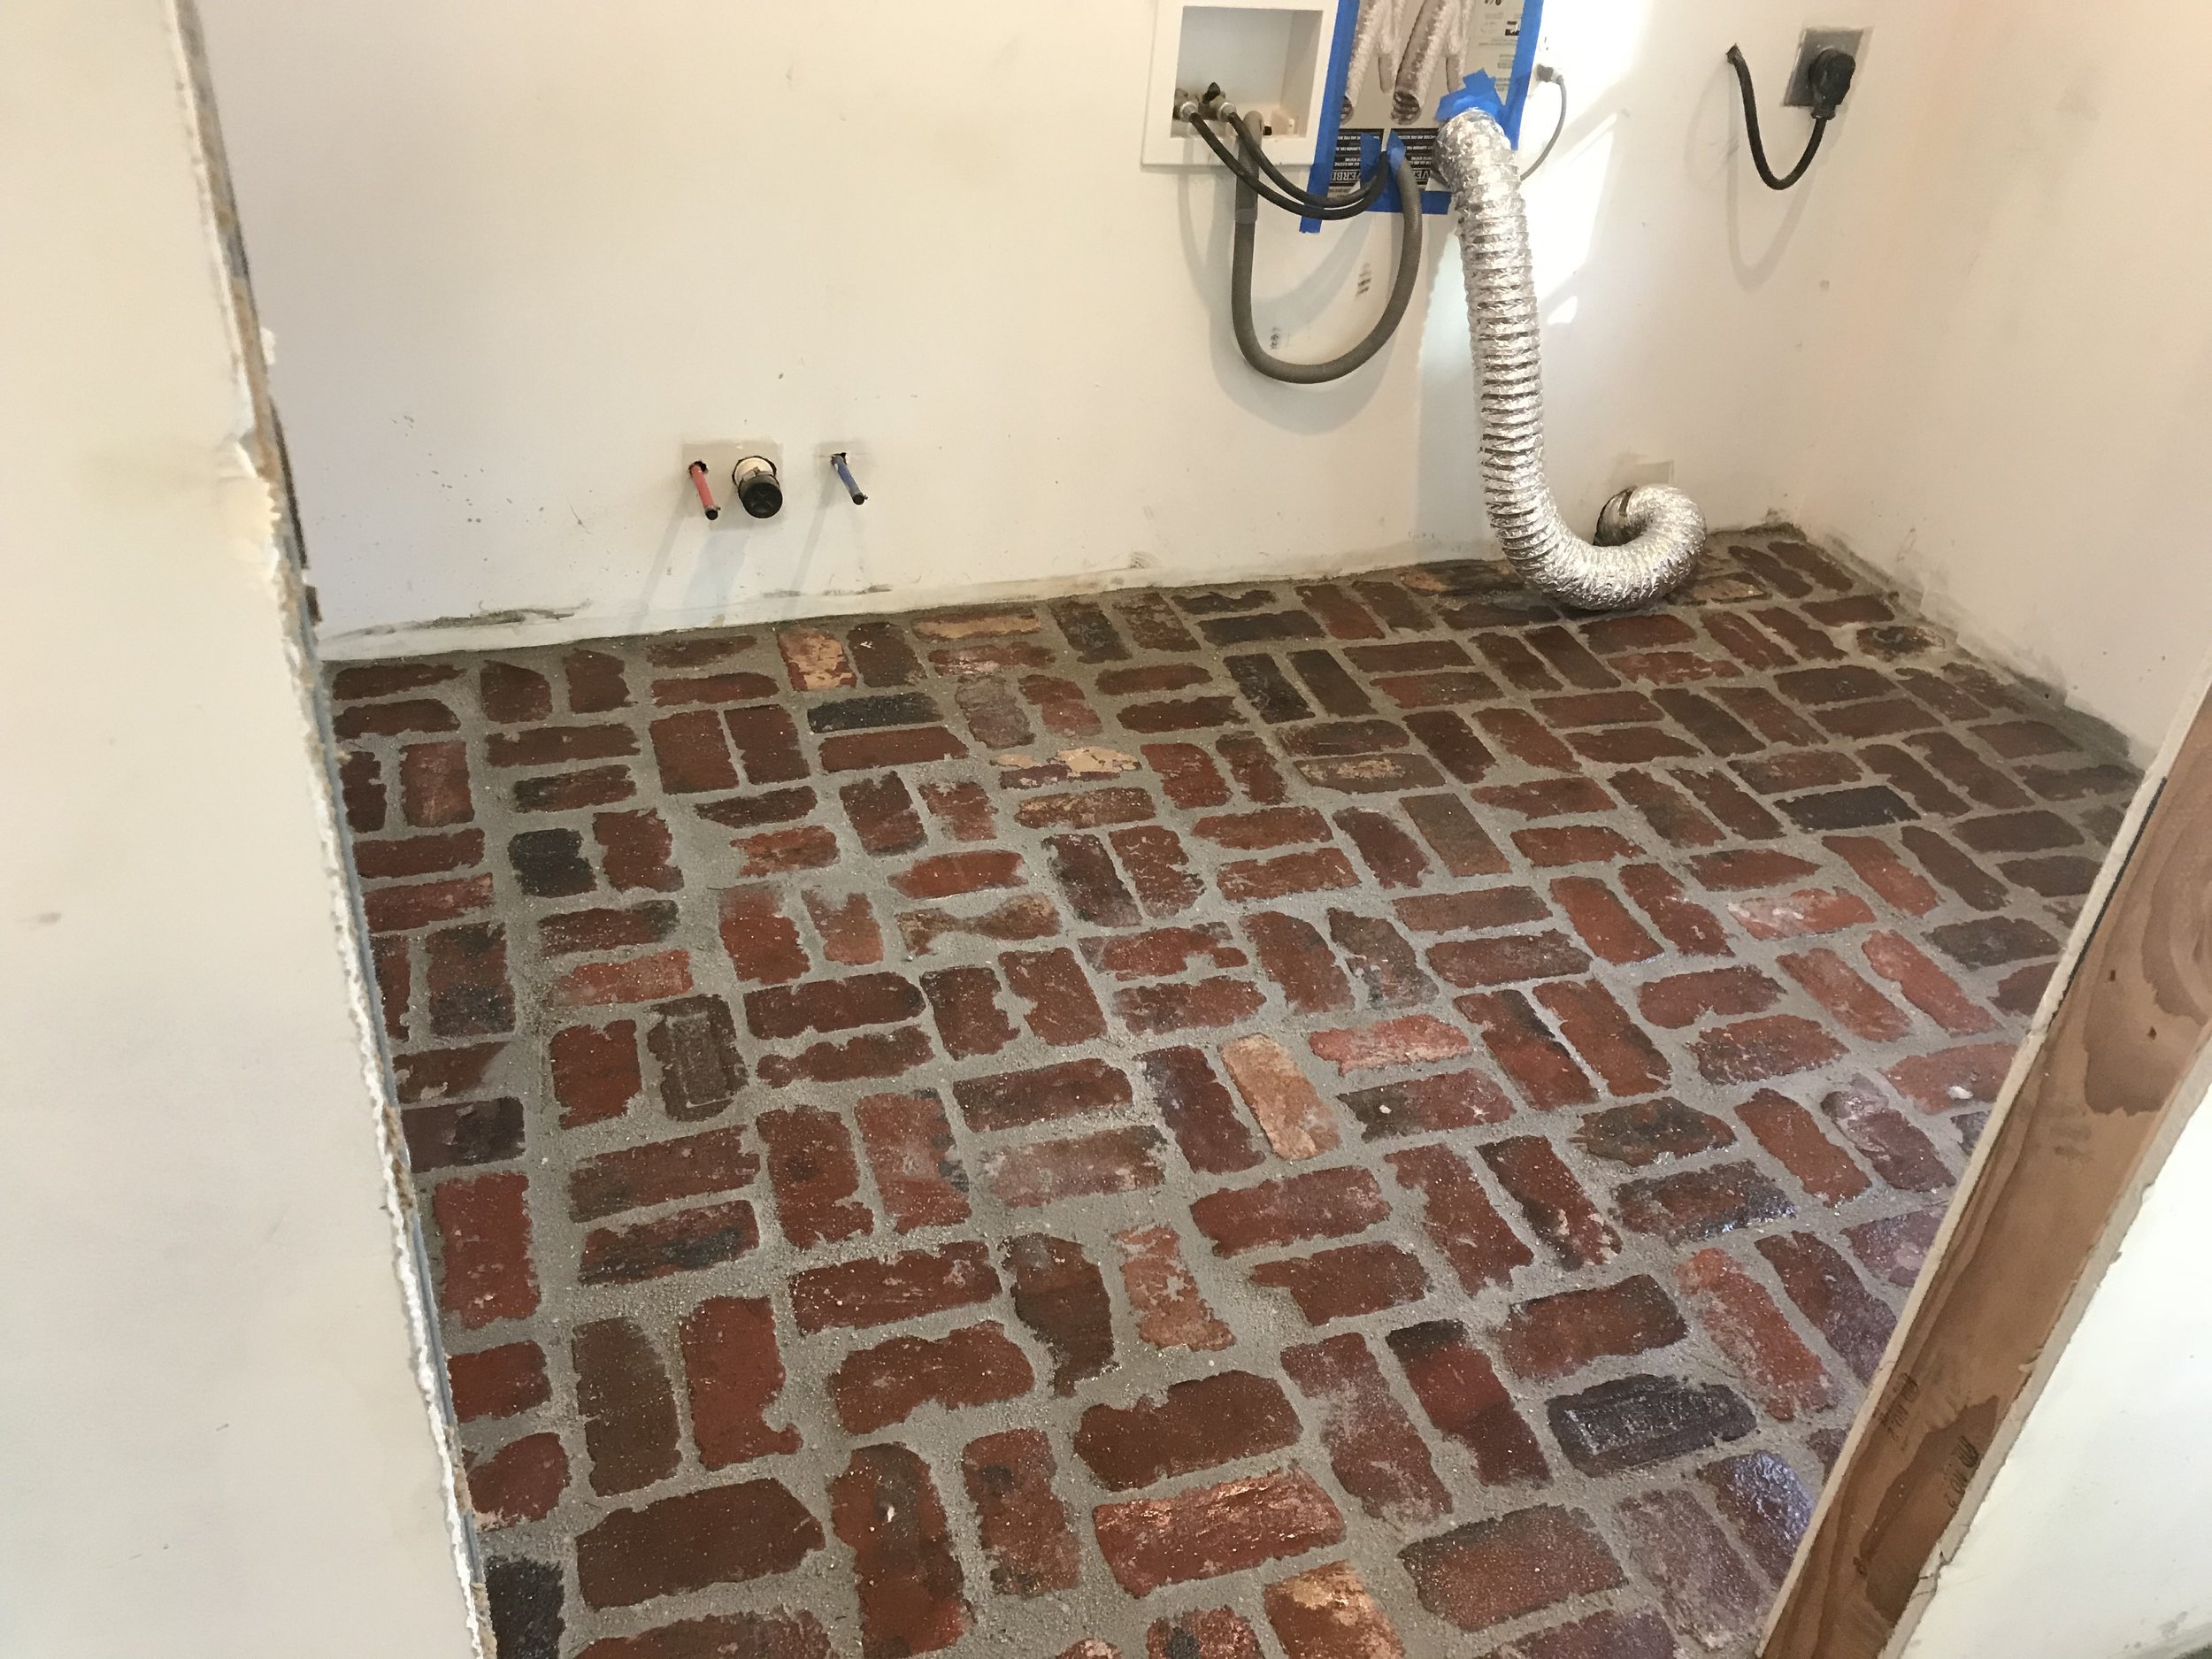  After the bricks were installed, I sealed the bricks, then grouted everything. This protected the bricks from getting stained by the grout. Once the grout was cleaned up, I applied multiple additional layers of sealant to the entire floor.  